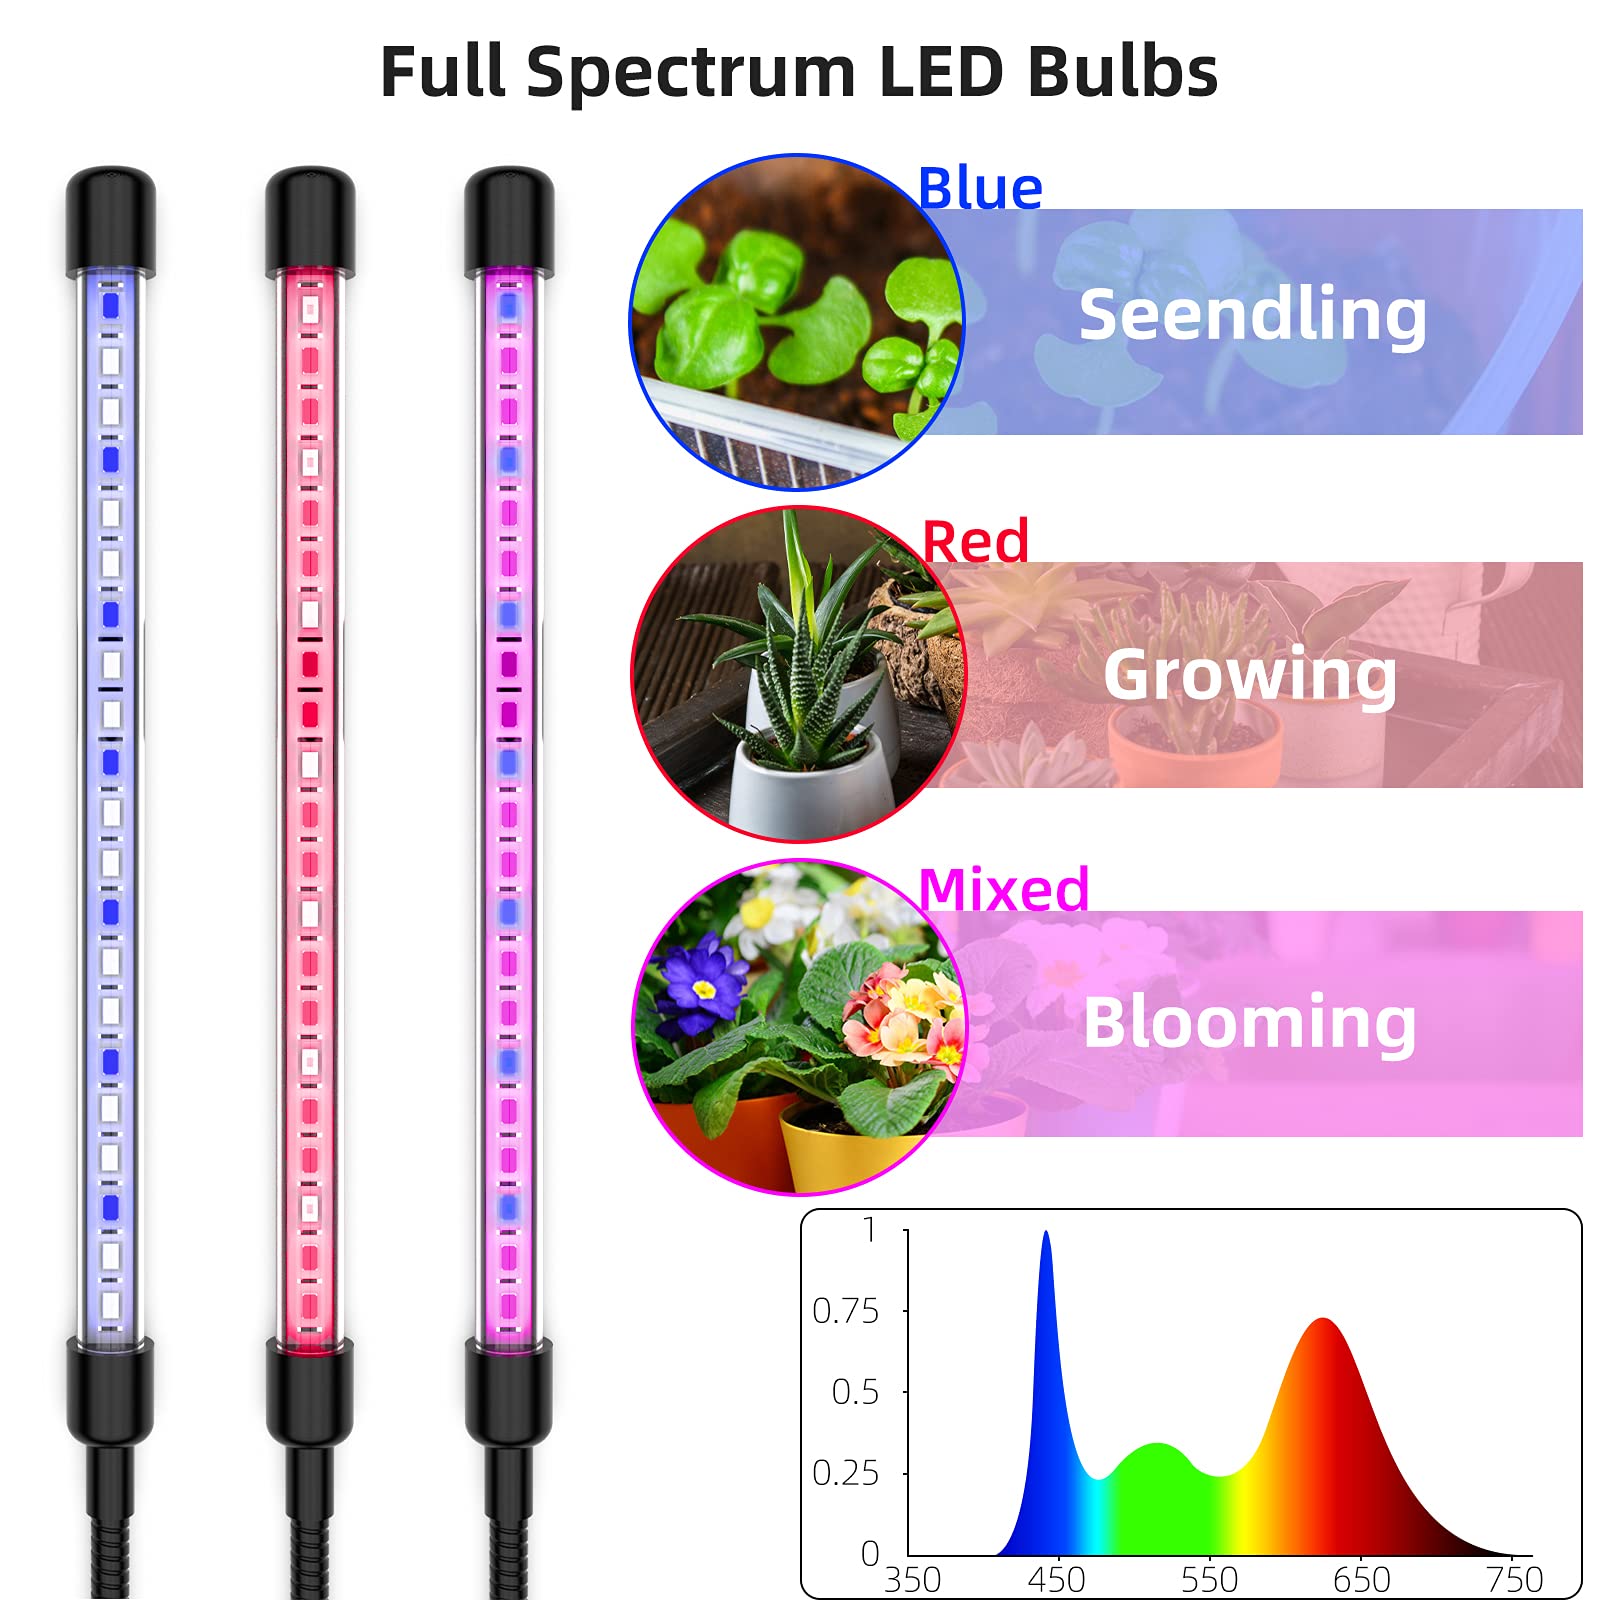 yoyomax Grow Light Plant Lights for Indoor Plants Full Spectrum LED Growing Lamps with Timer for House Greenhouse Seed Starting Succulent Growth Garden Seedlings (5 Heads)